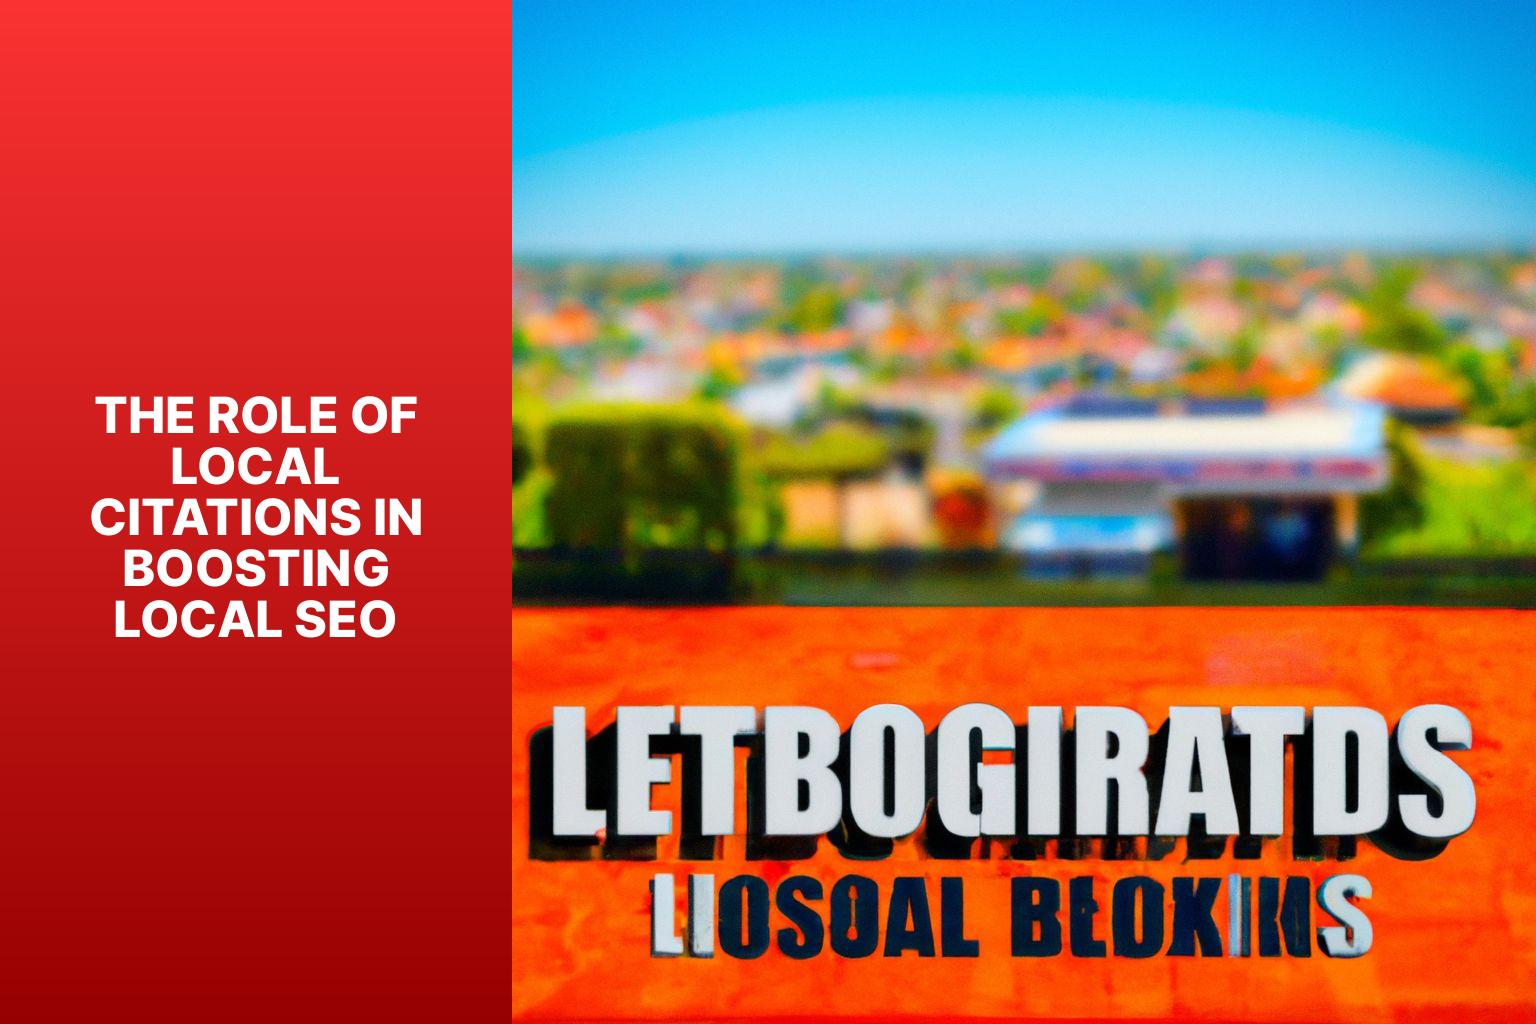 The Role of Local Citations in Boosting Local SEO